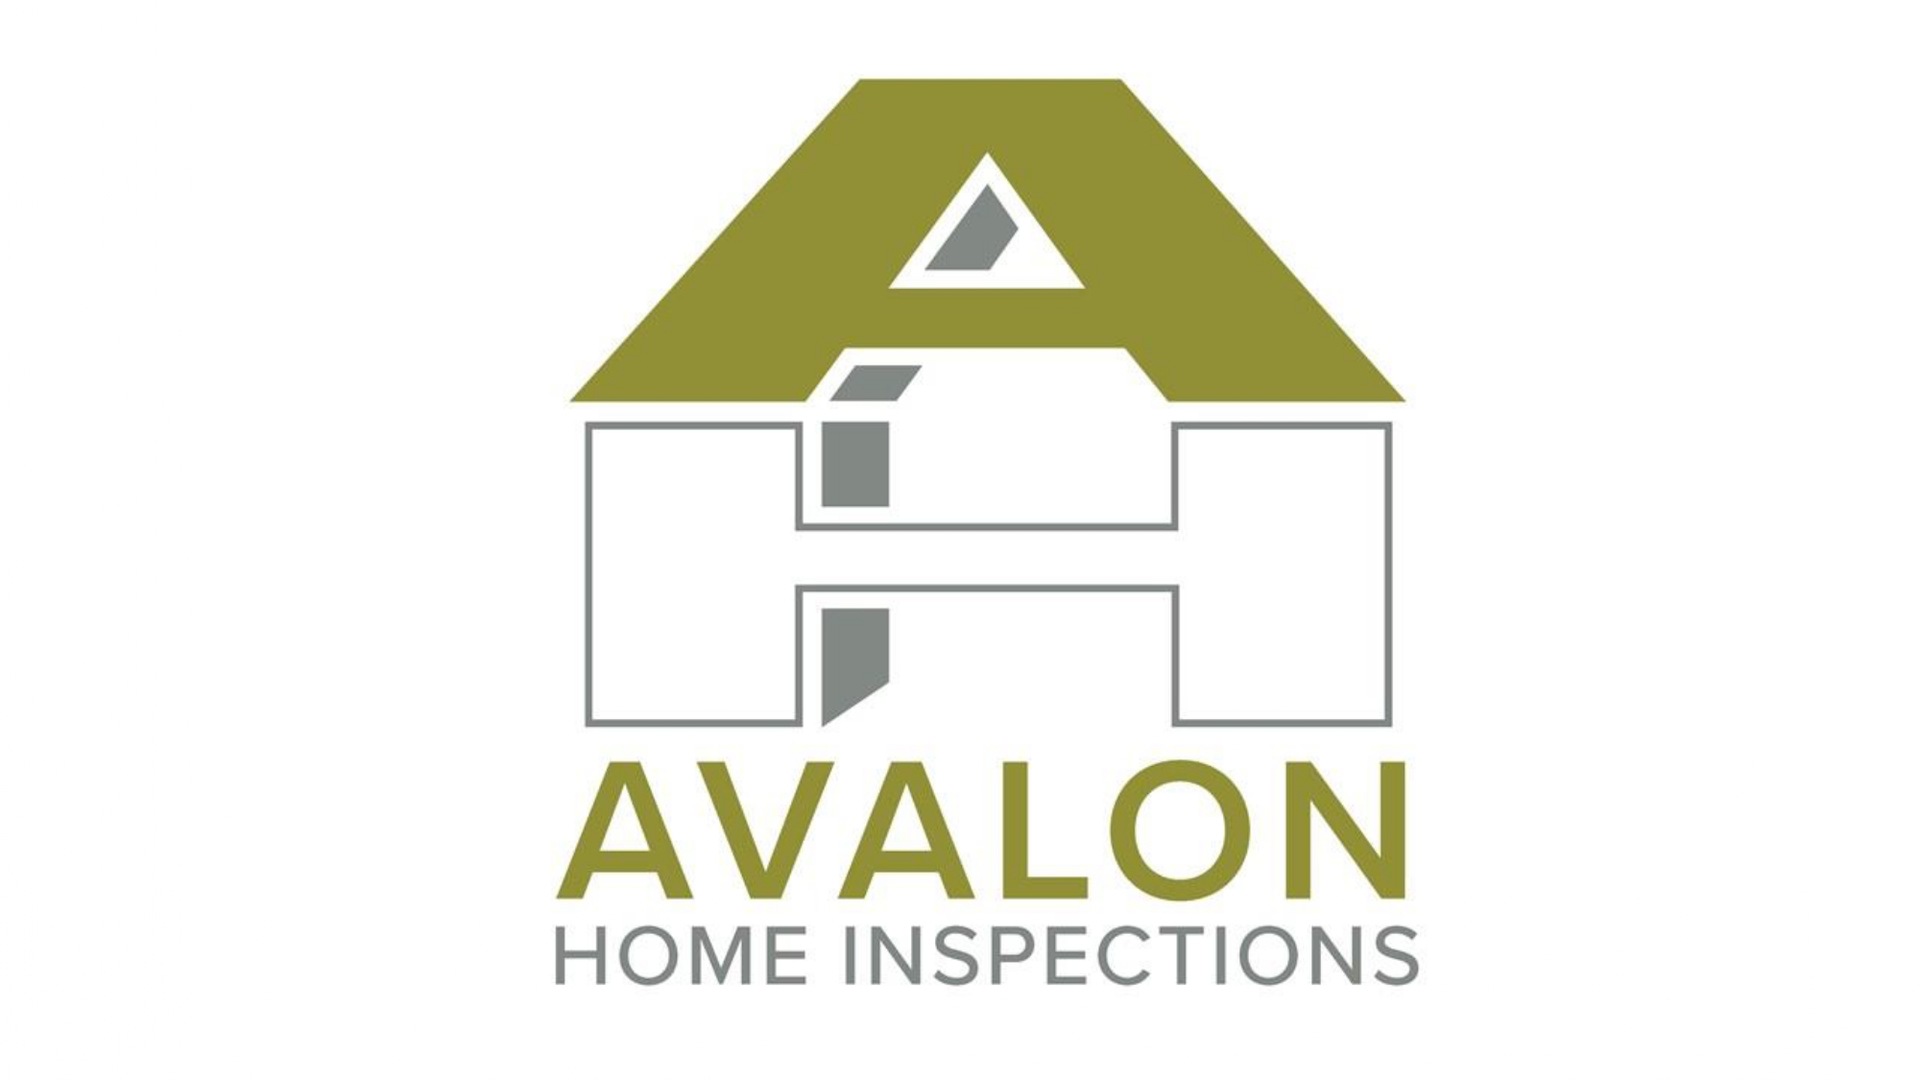 Avalon Home Inspections, Inc.